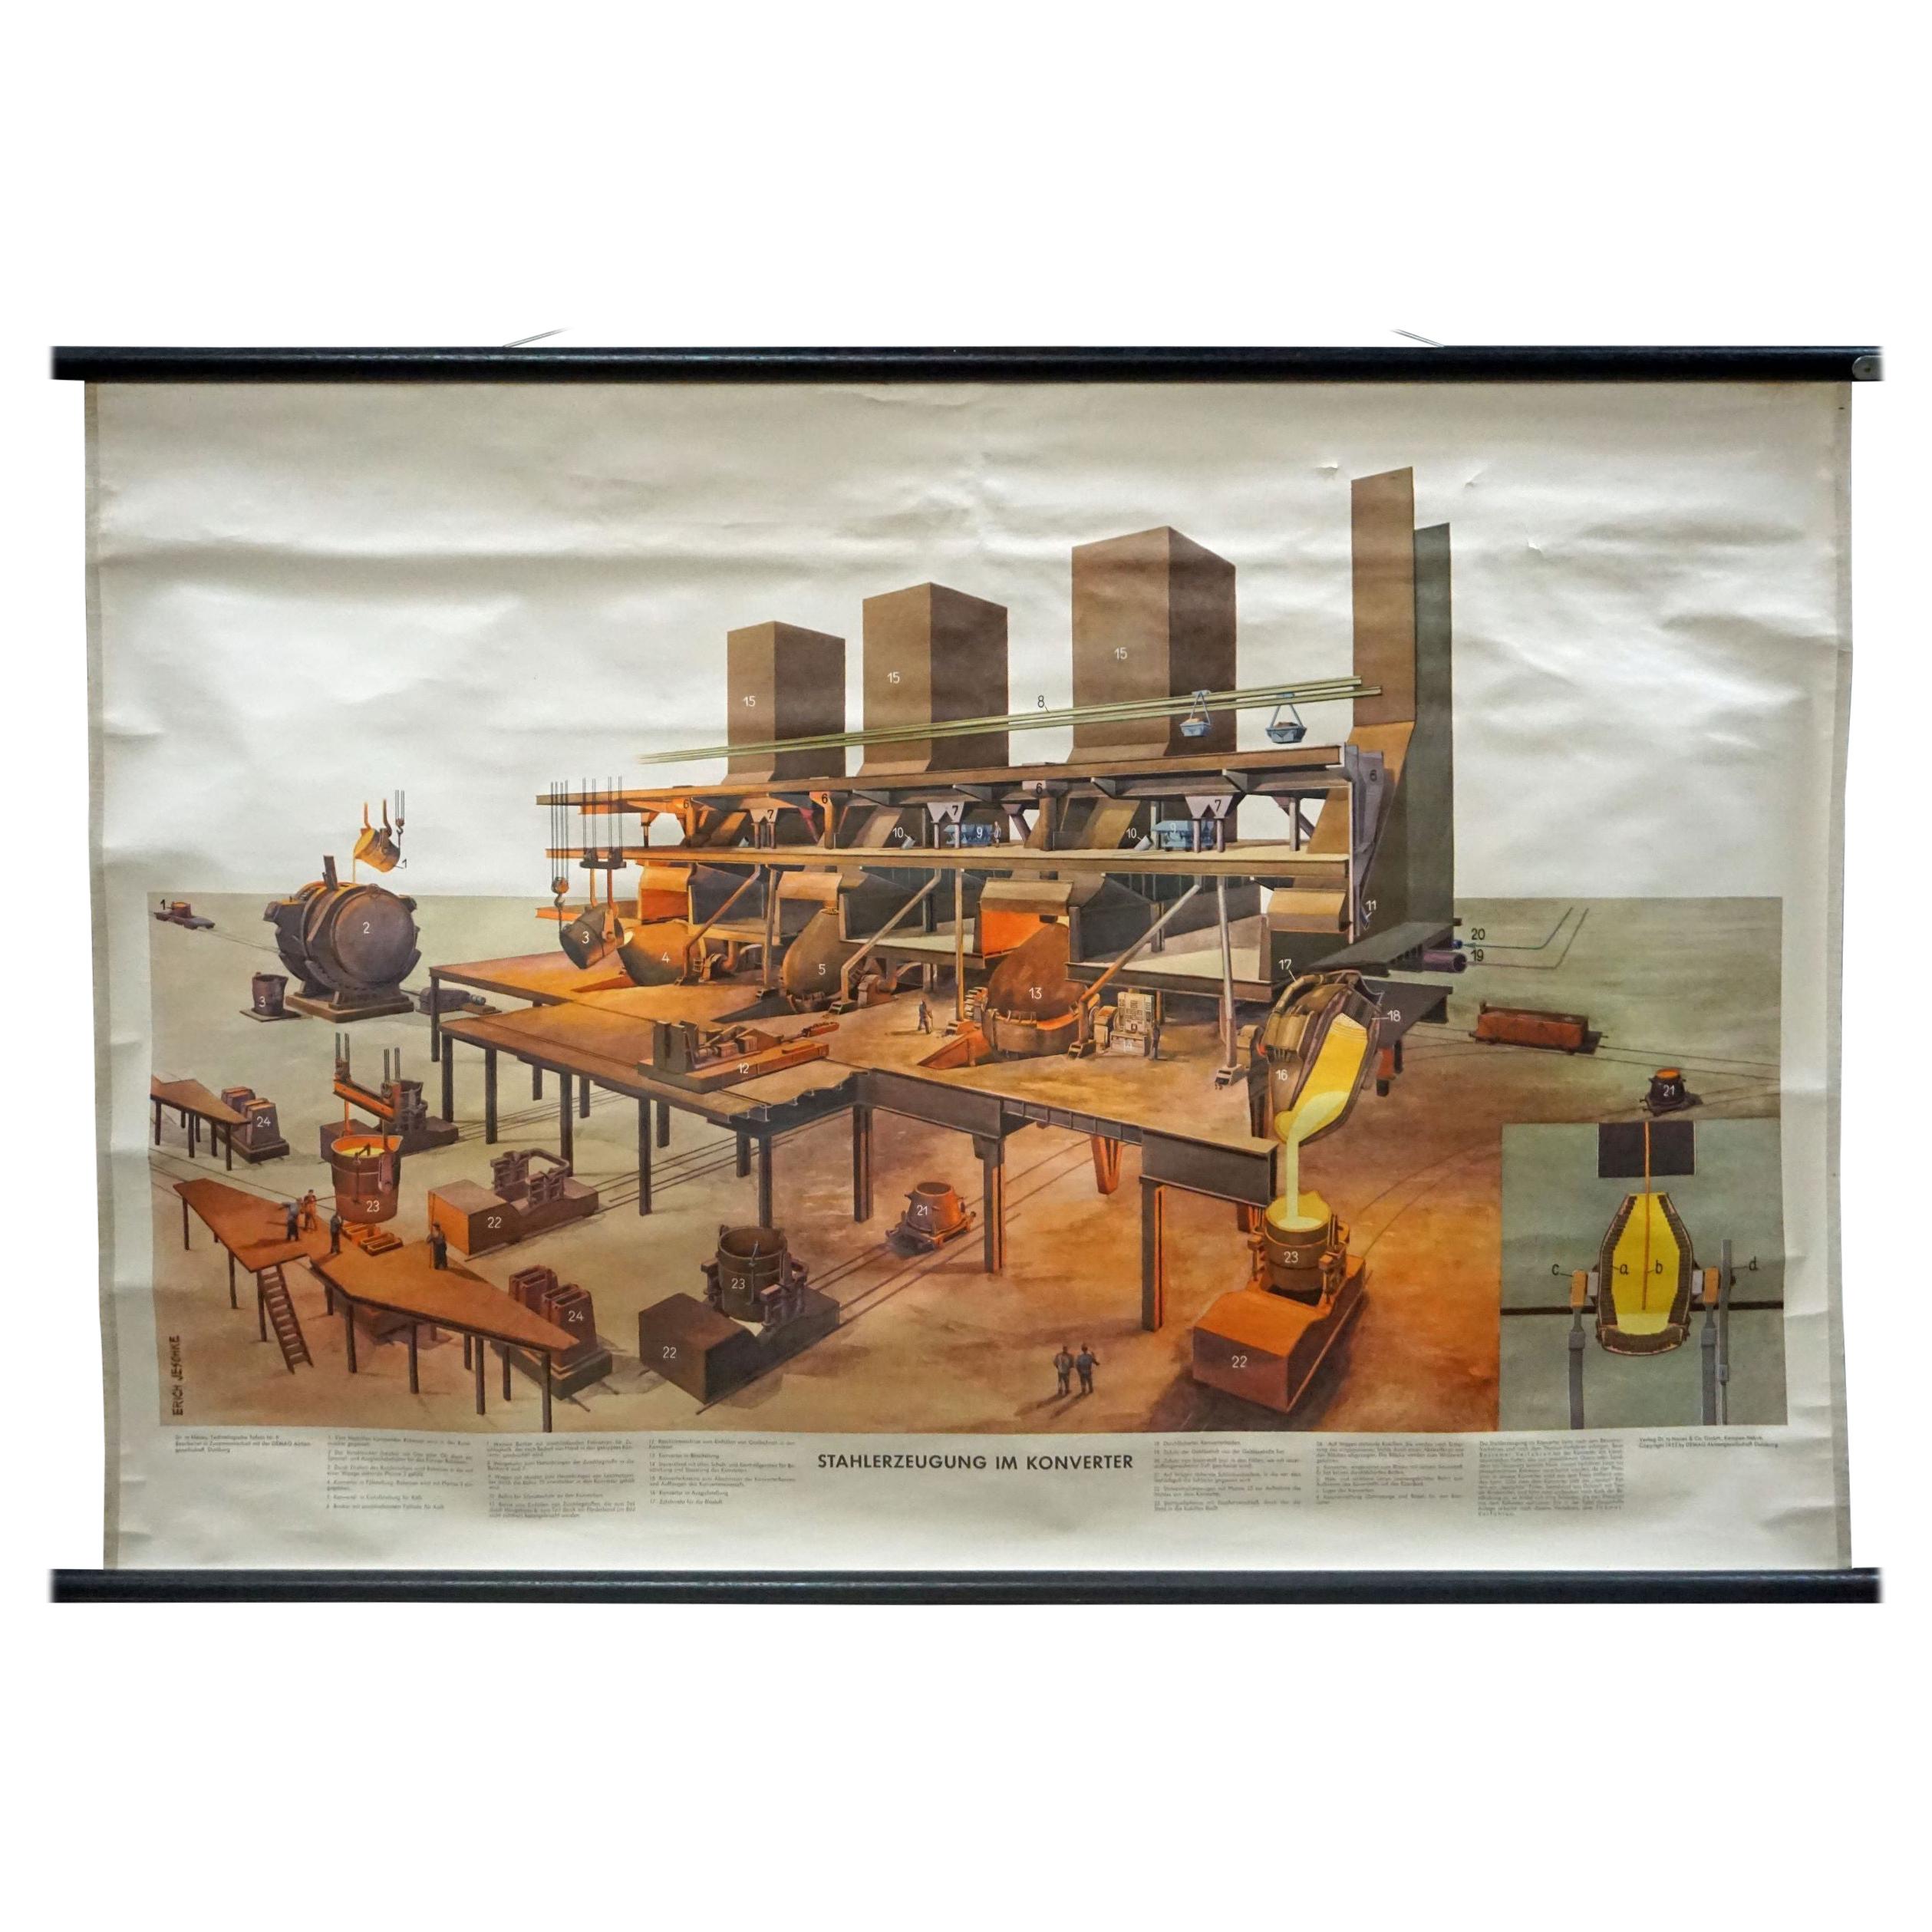 Steel Manufacture in a Converter Rollable Wall Chart Poster For Sale